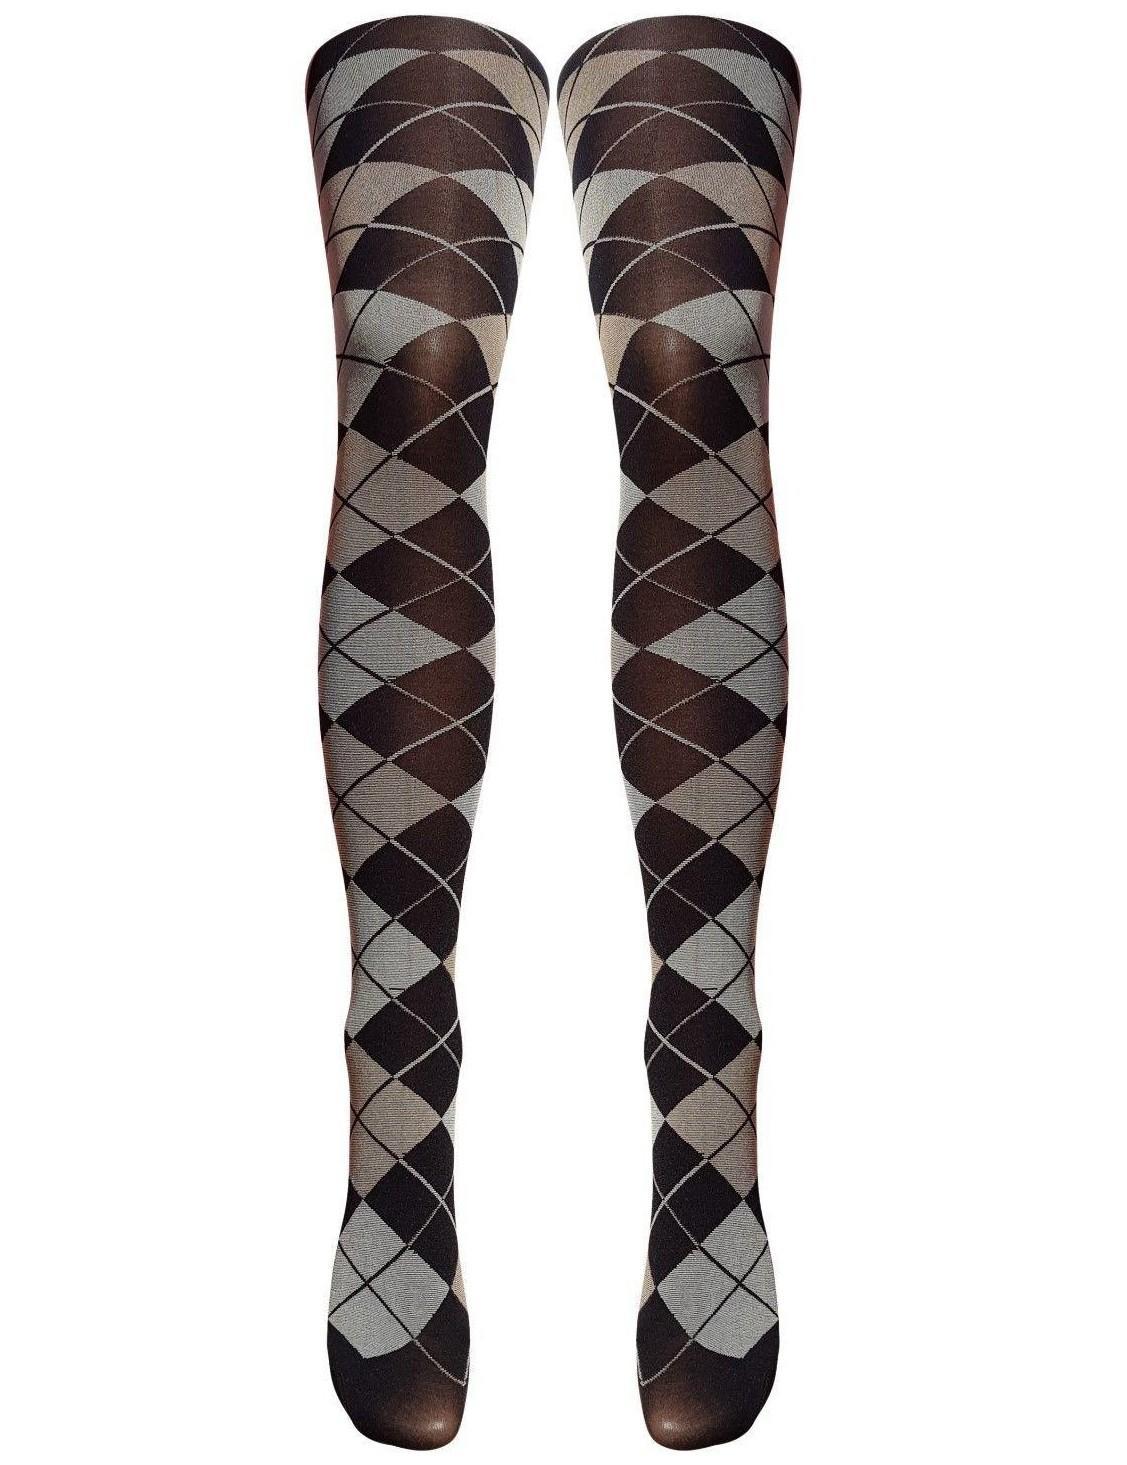 https://cdn.ecommercedns.uk/files/4/227664/4/9508024/silver-legs-argyle-check-patterned-tights-black-grey-taupe.jpg